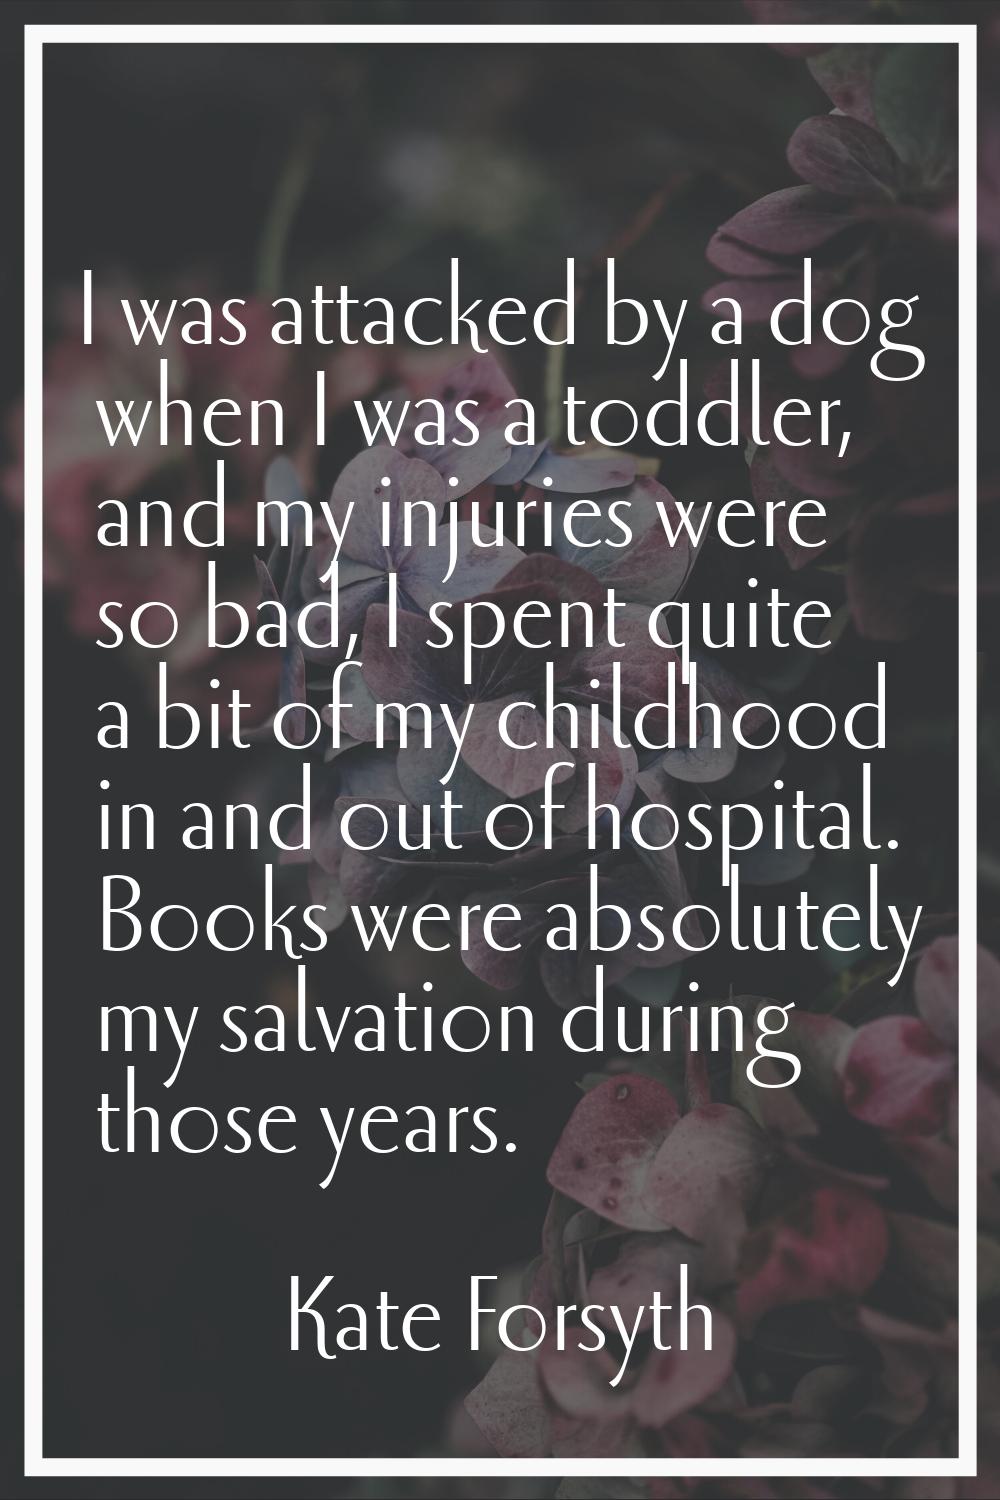 I was attacked by a dog when I was a toddler, and my injuries were so bad, I spent quite a bit of m